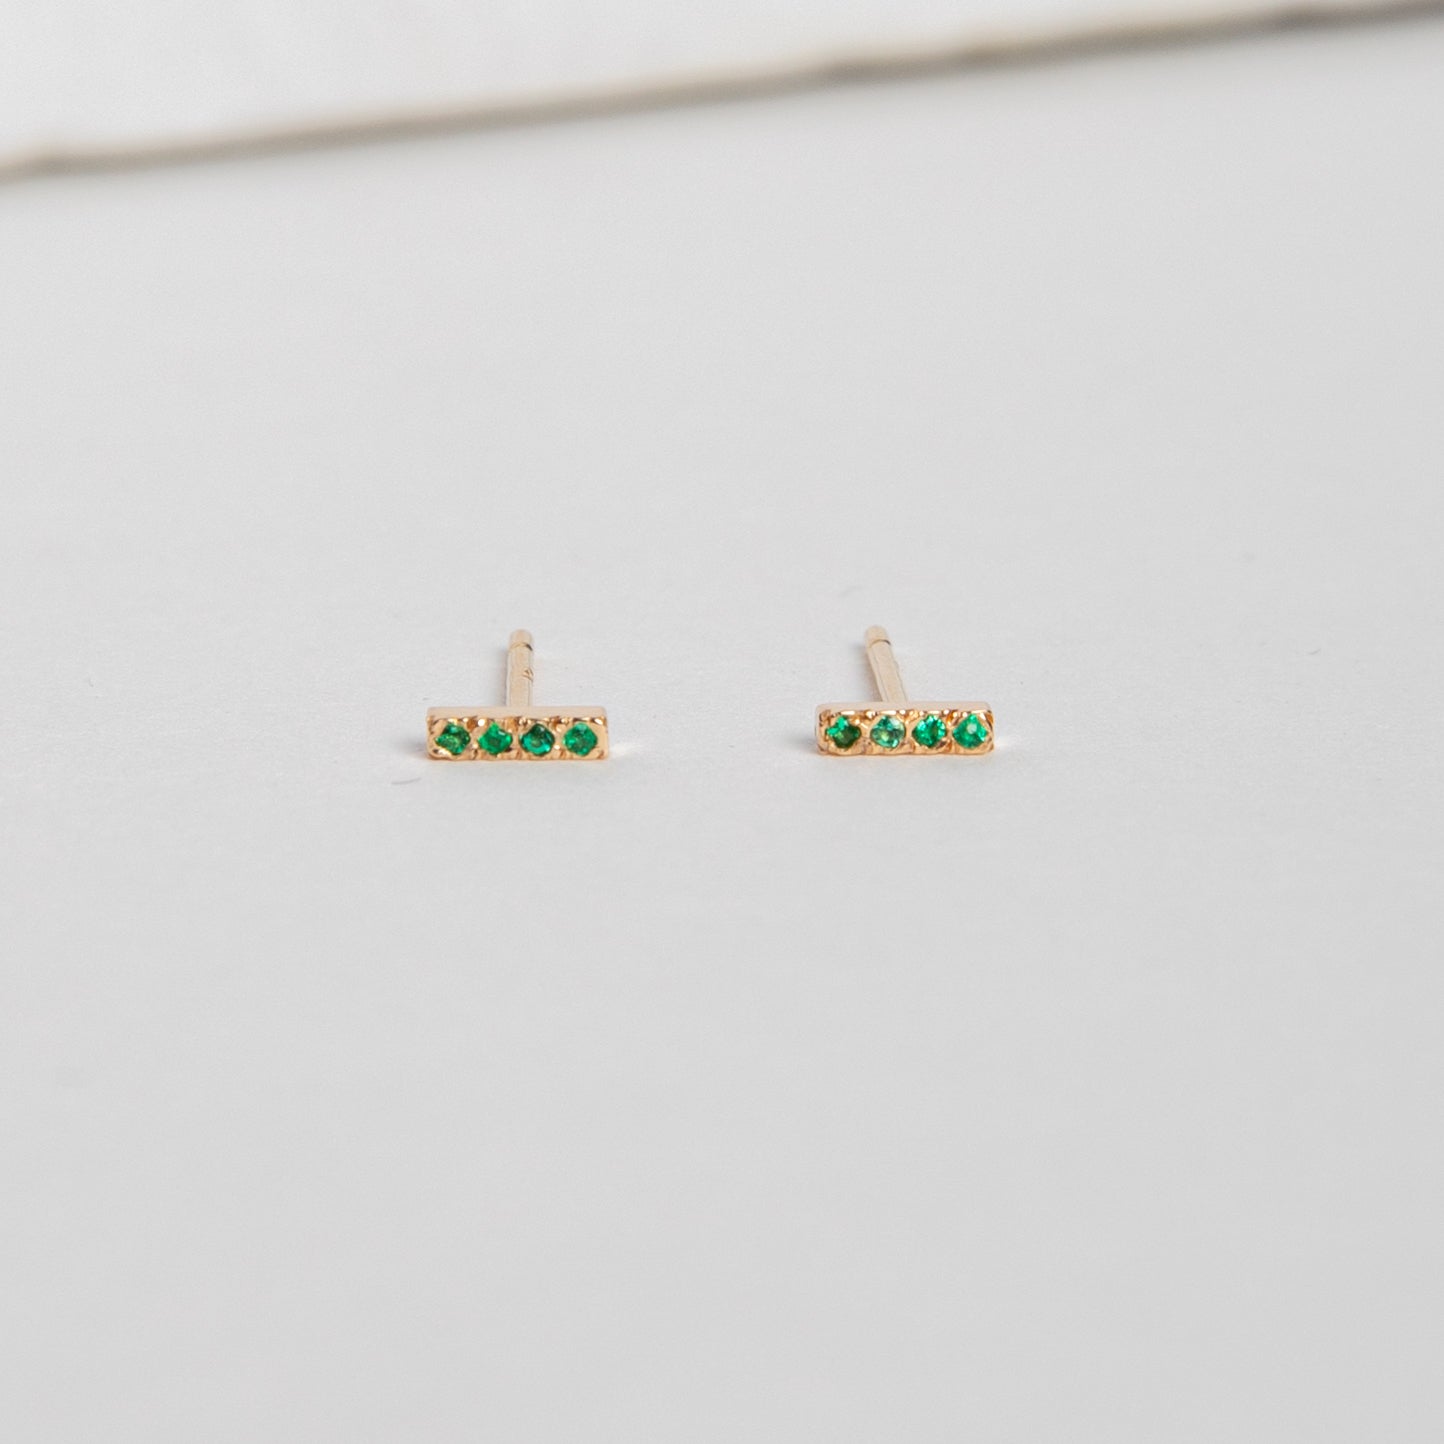 Vilko Designer Stud in 14k Yellow Gold set with Emerald by SHW Fine Jewelry